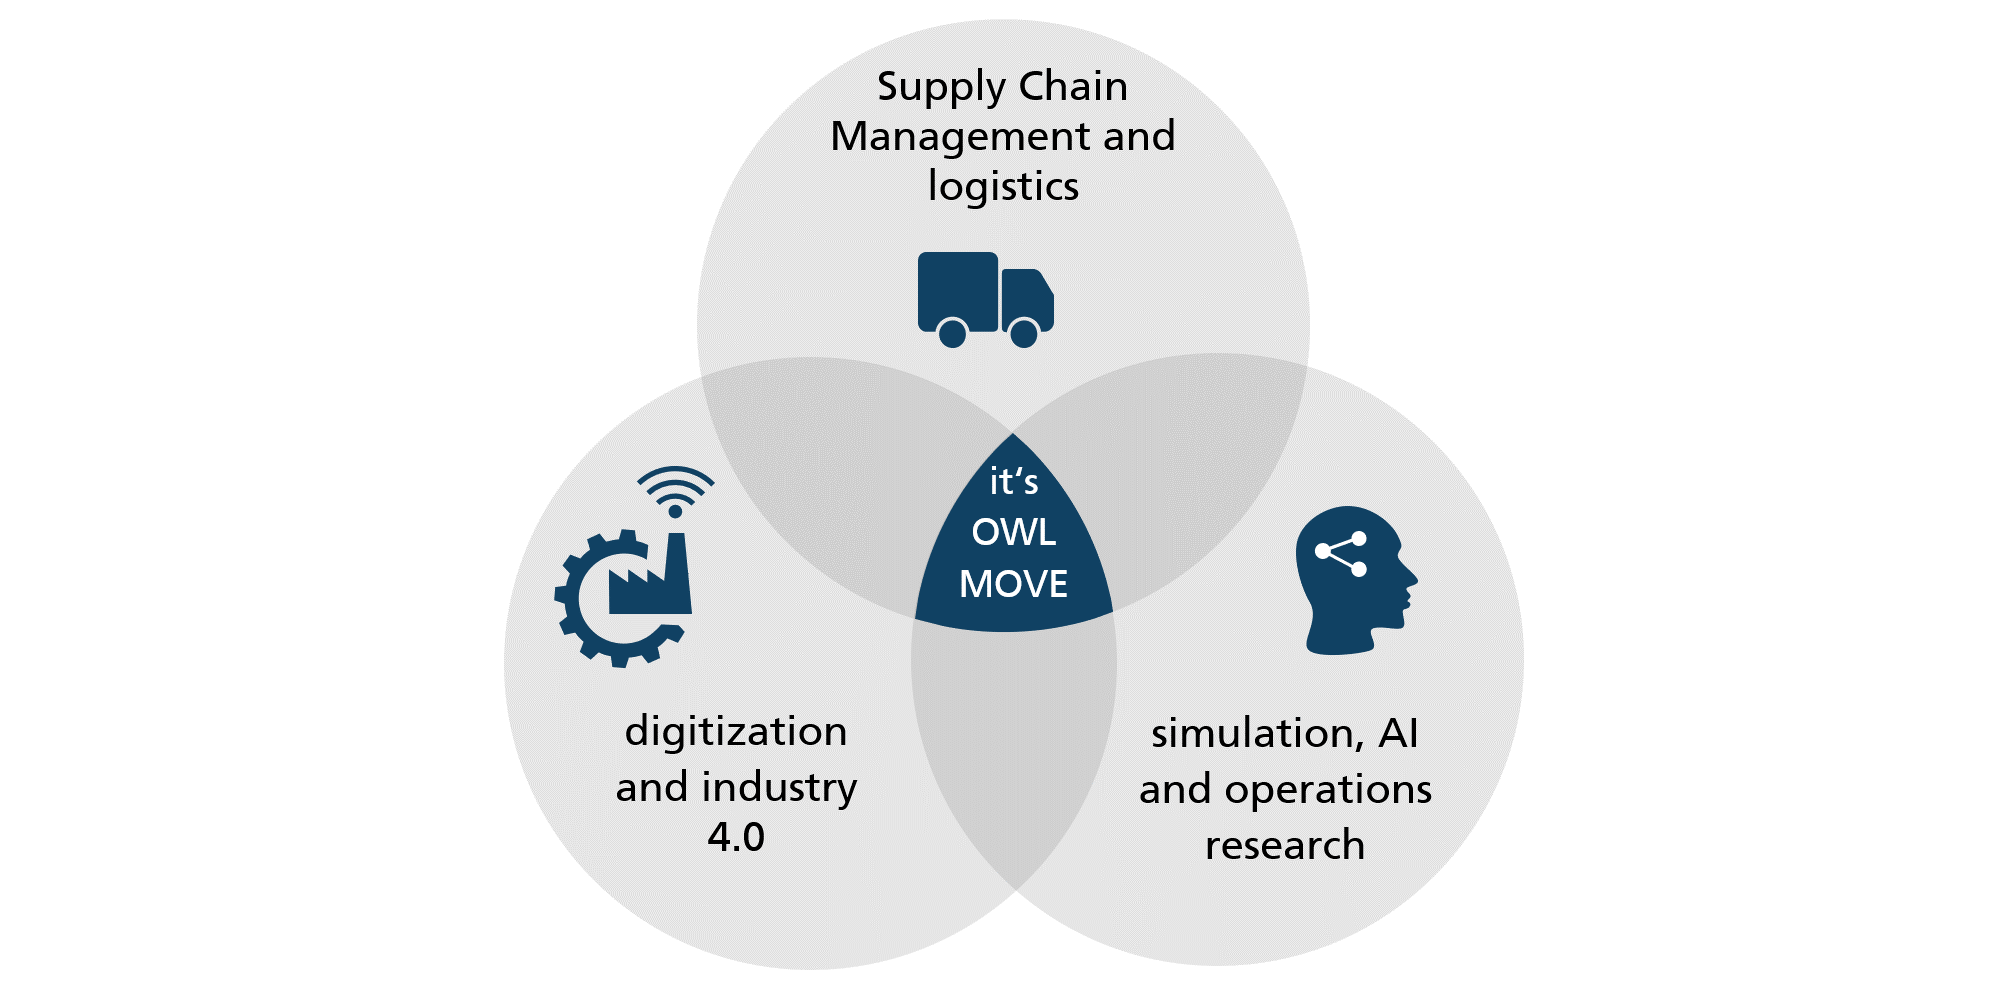 optimization of processes in logistics with AI and digitization